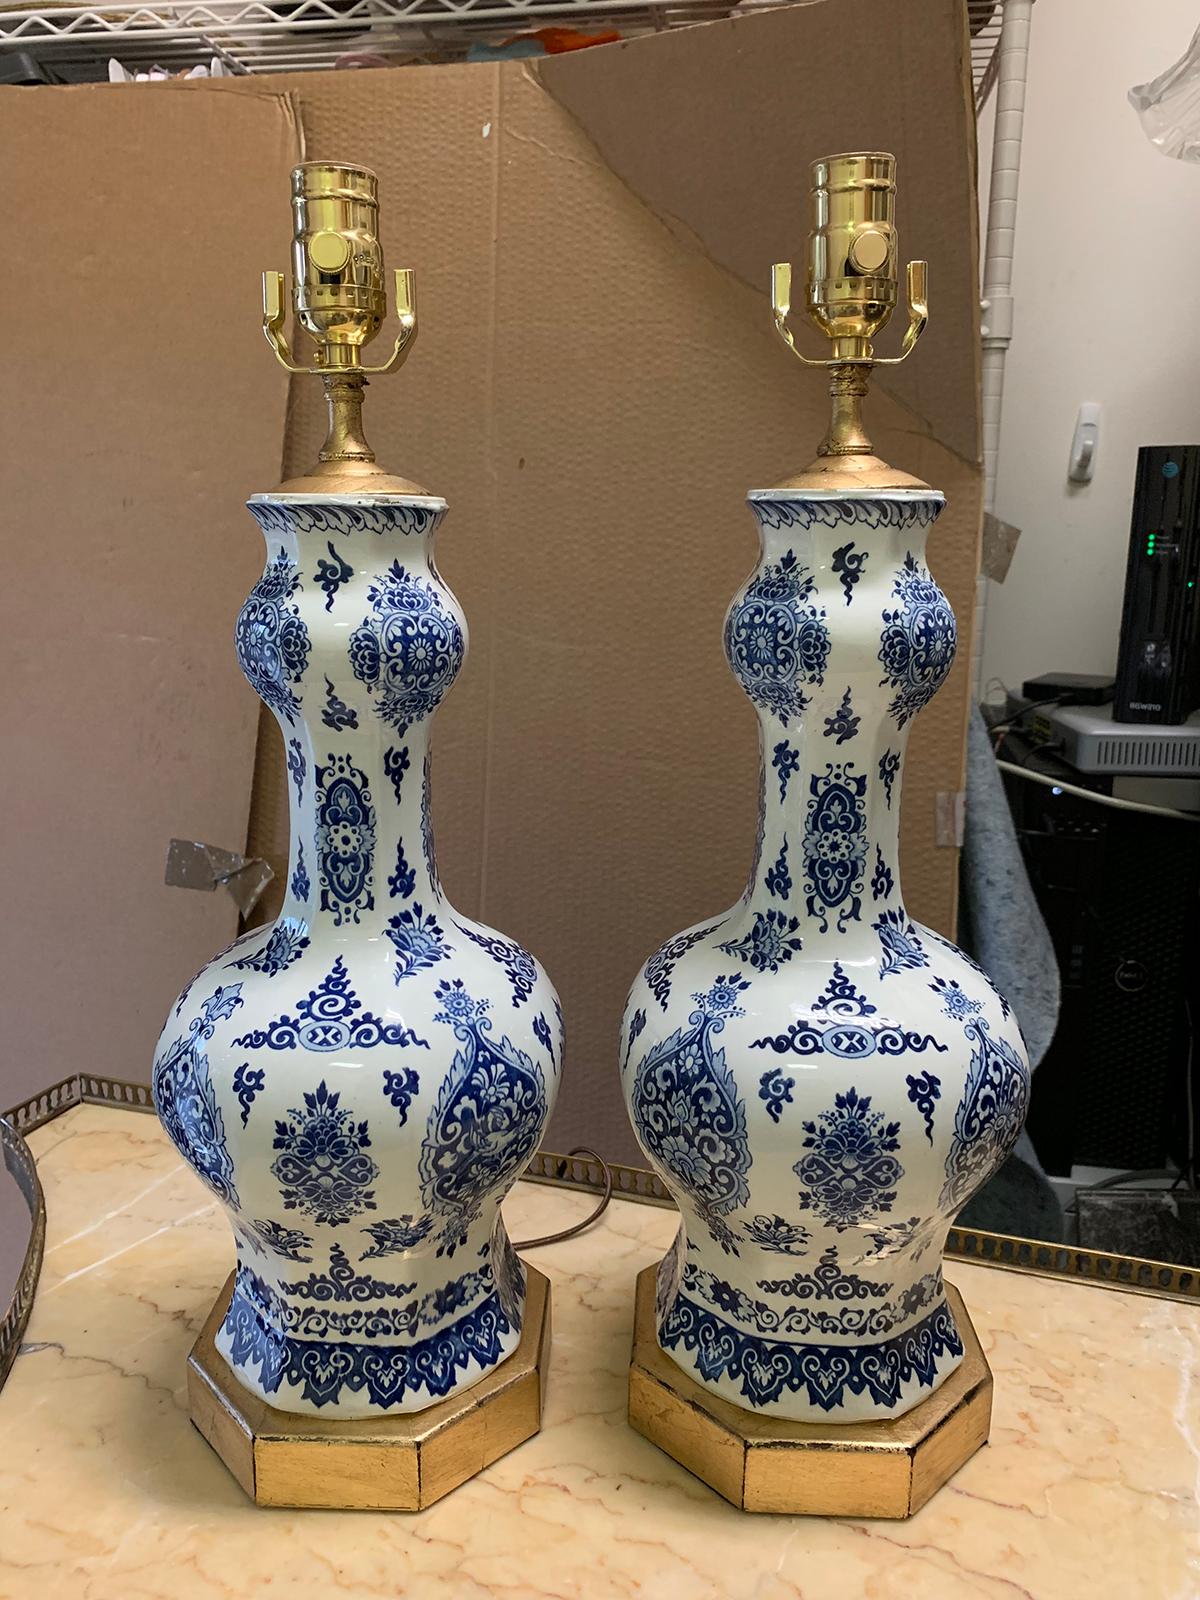 Pair of 19th-20th century delft blue and white vases as lamps, custom gilded bases.
Brand new wiring.
Measures: 7